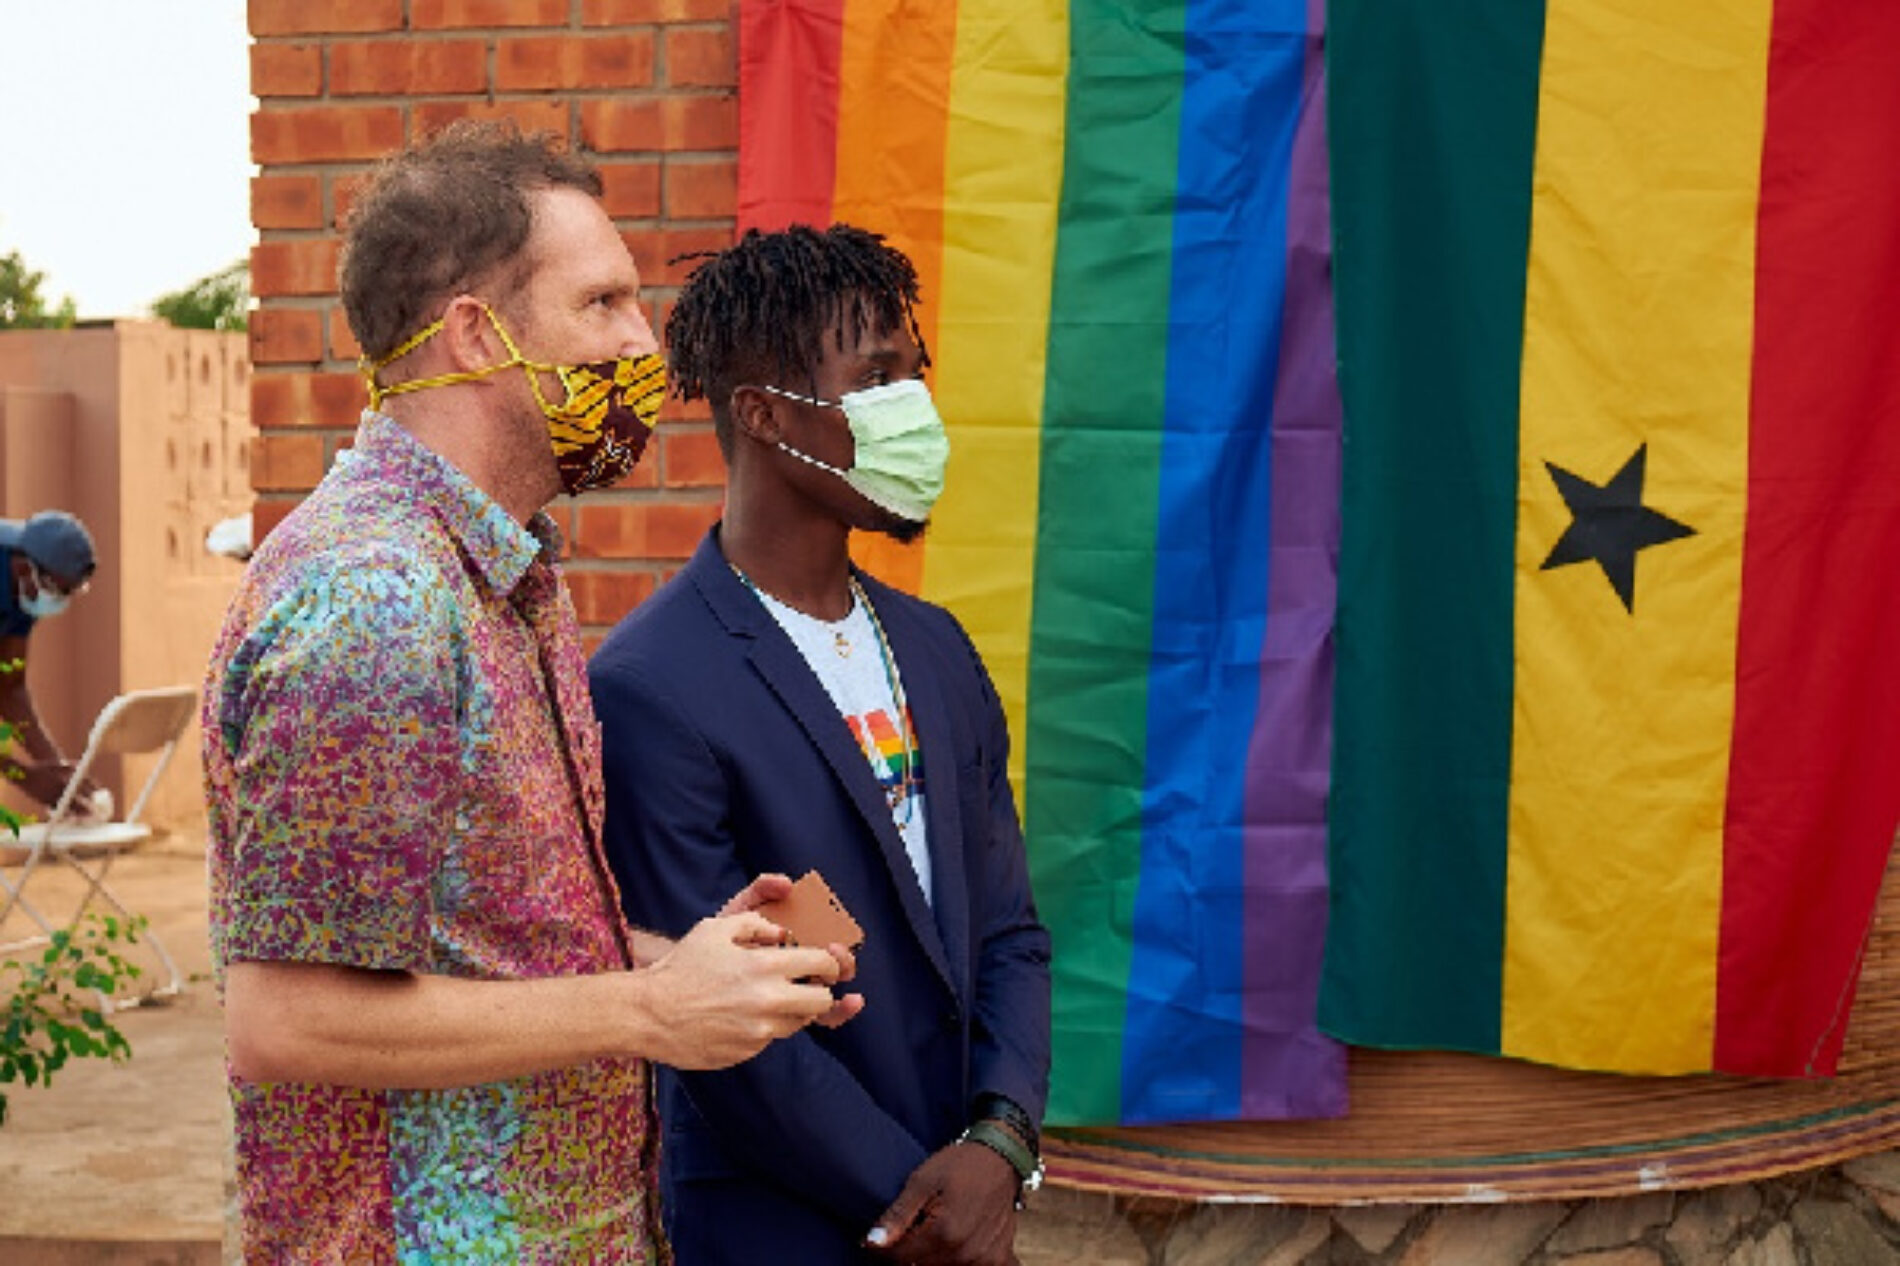 Anti-Gay Uproar Follows After The Opening Of LGBTQ+ Community Center In Ghana, Establishing The Country’s Widespread Homophobia